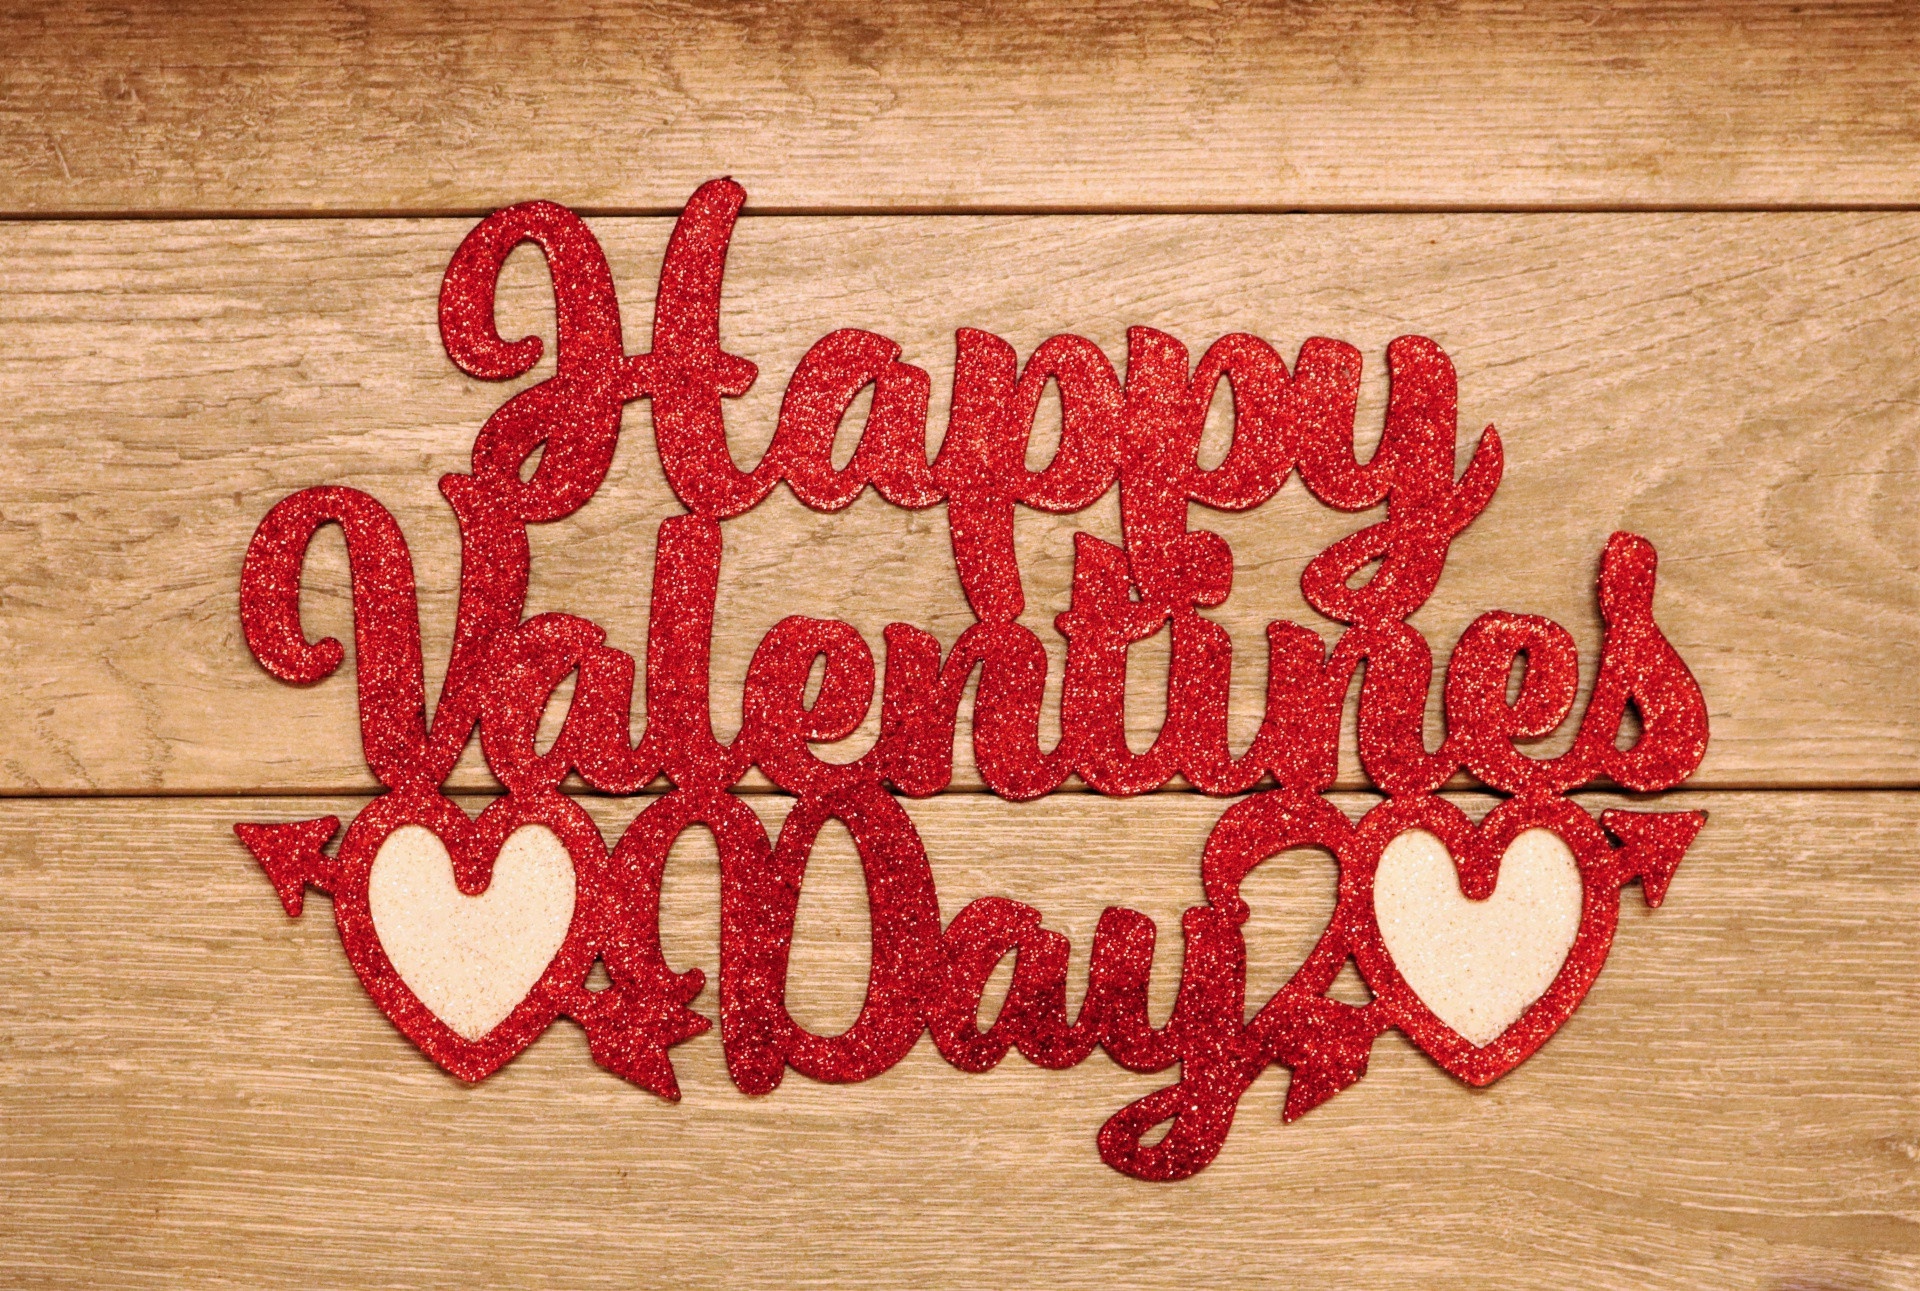 Cool Backgrounds  Valentine's Day